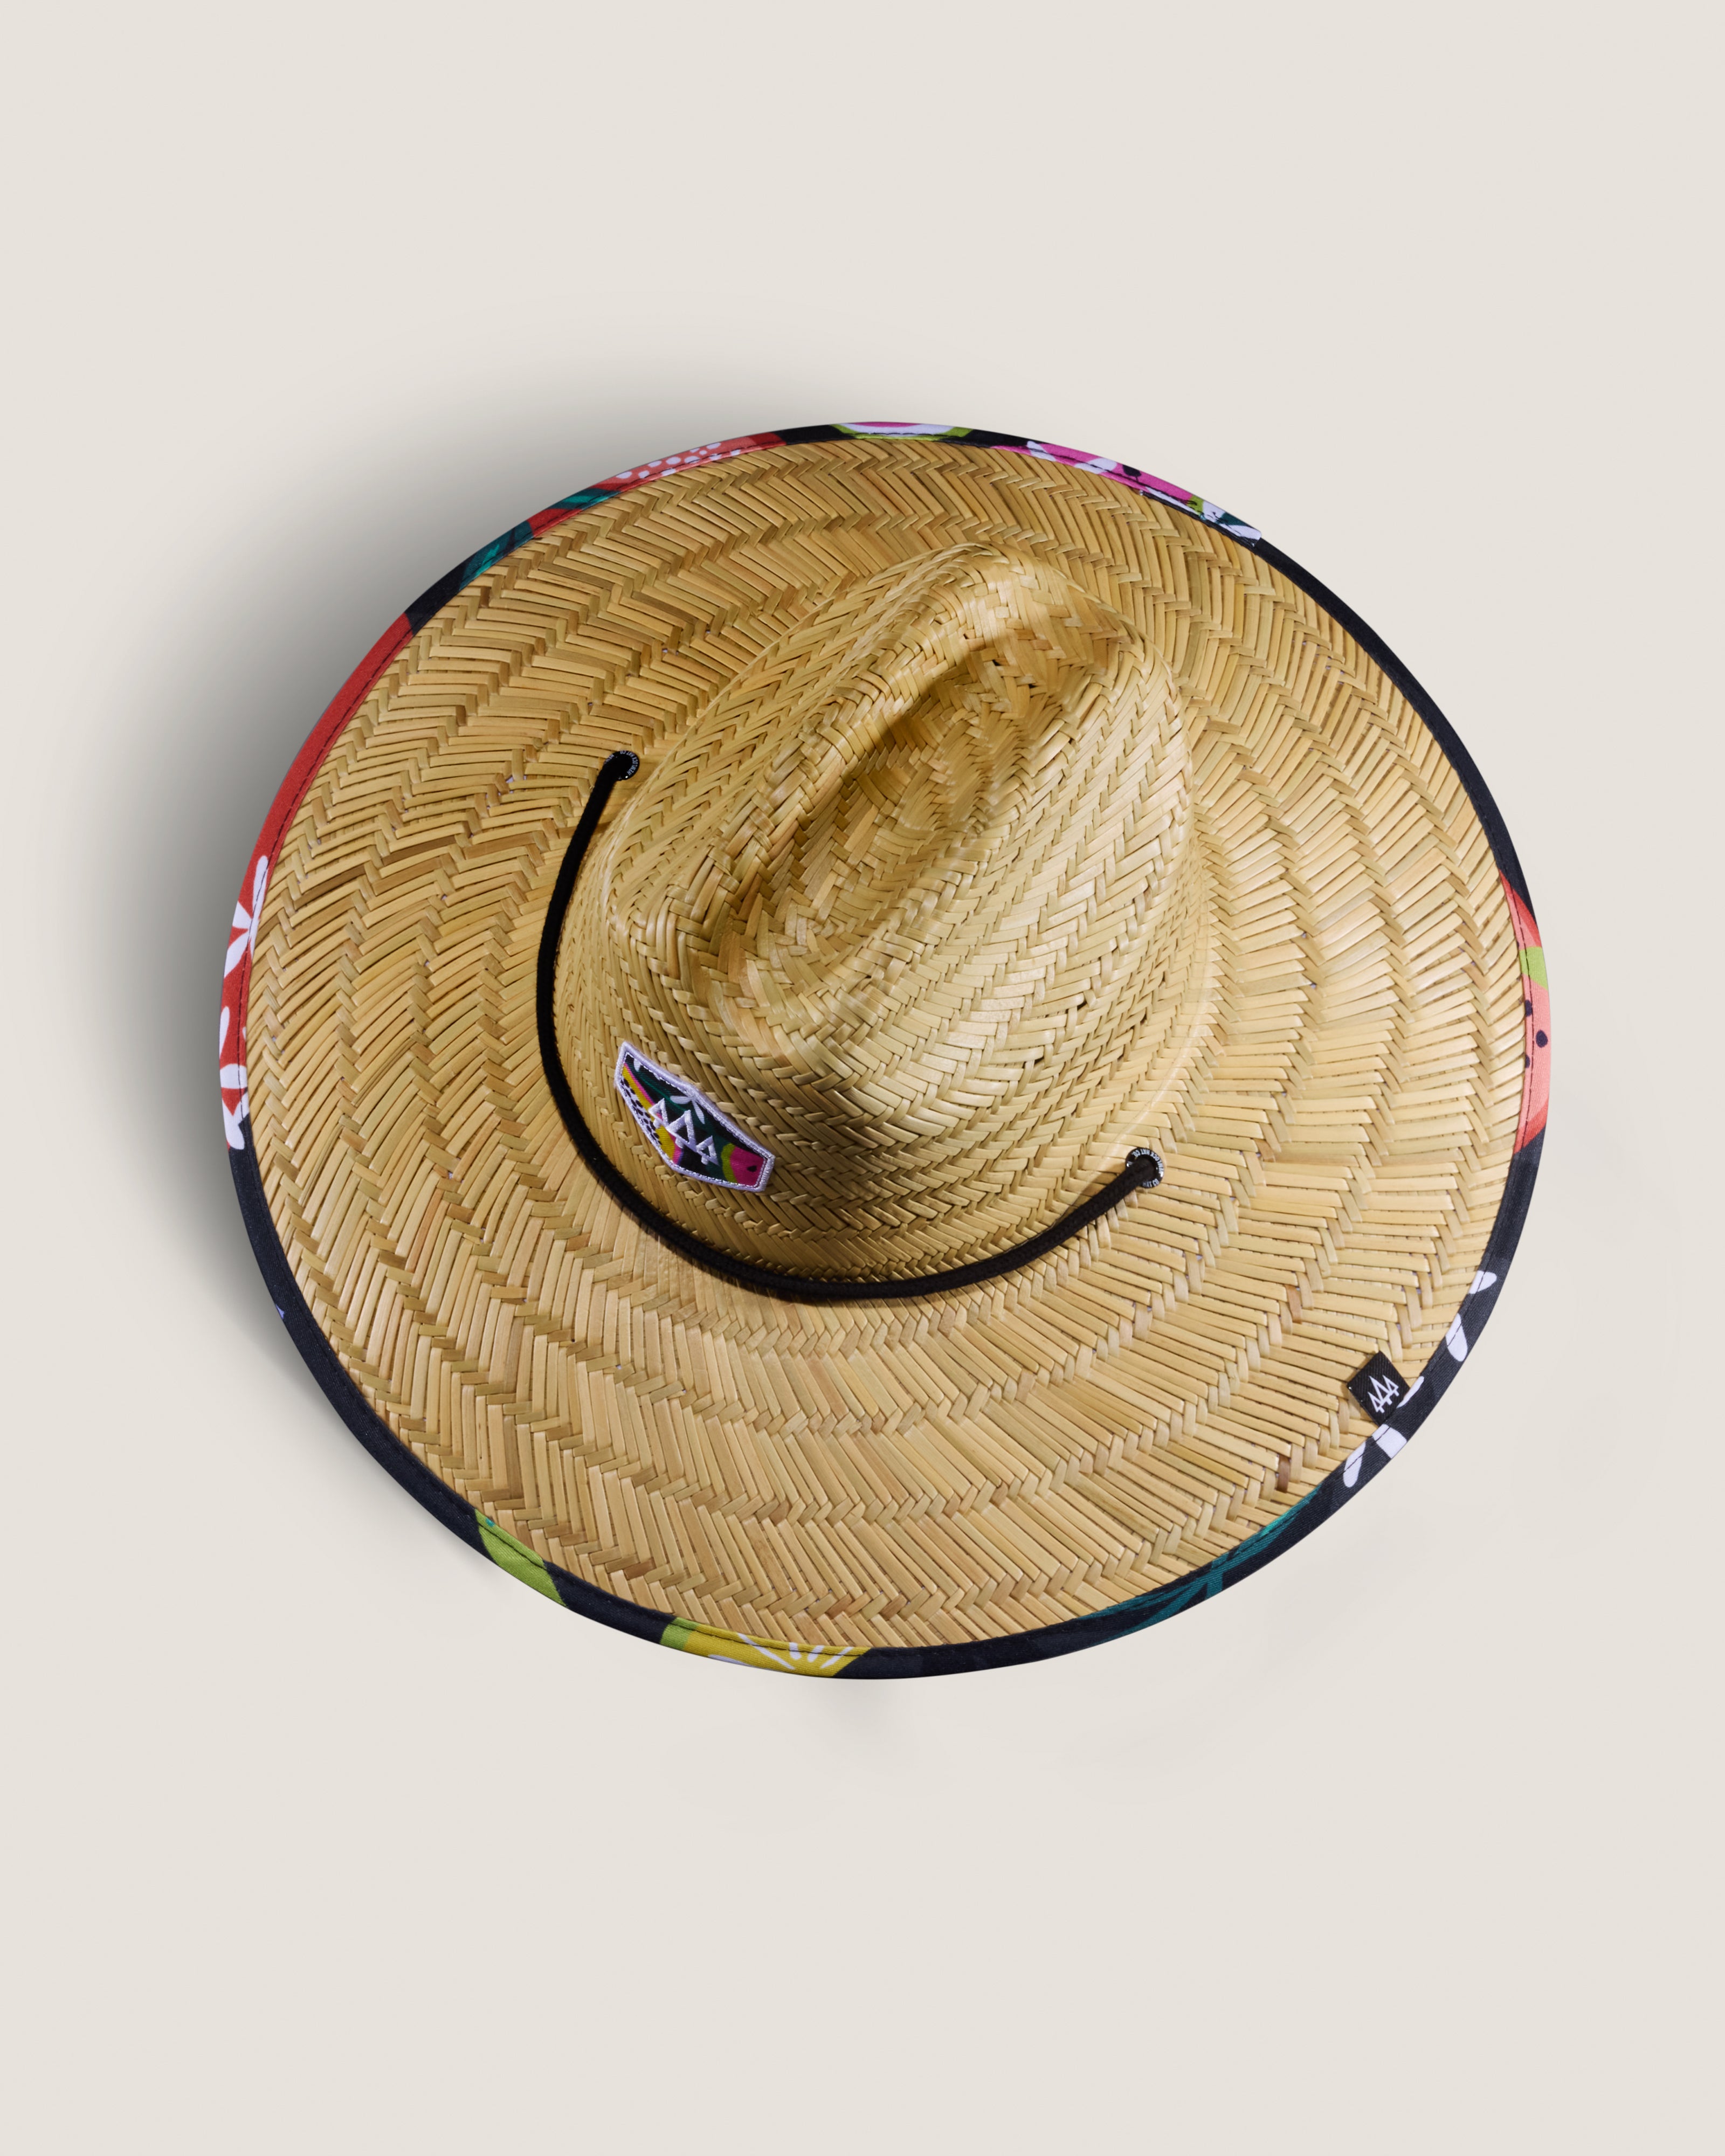 Hemlock Blend straw lifeguard hat with fruit pattern top of hat